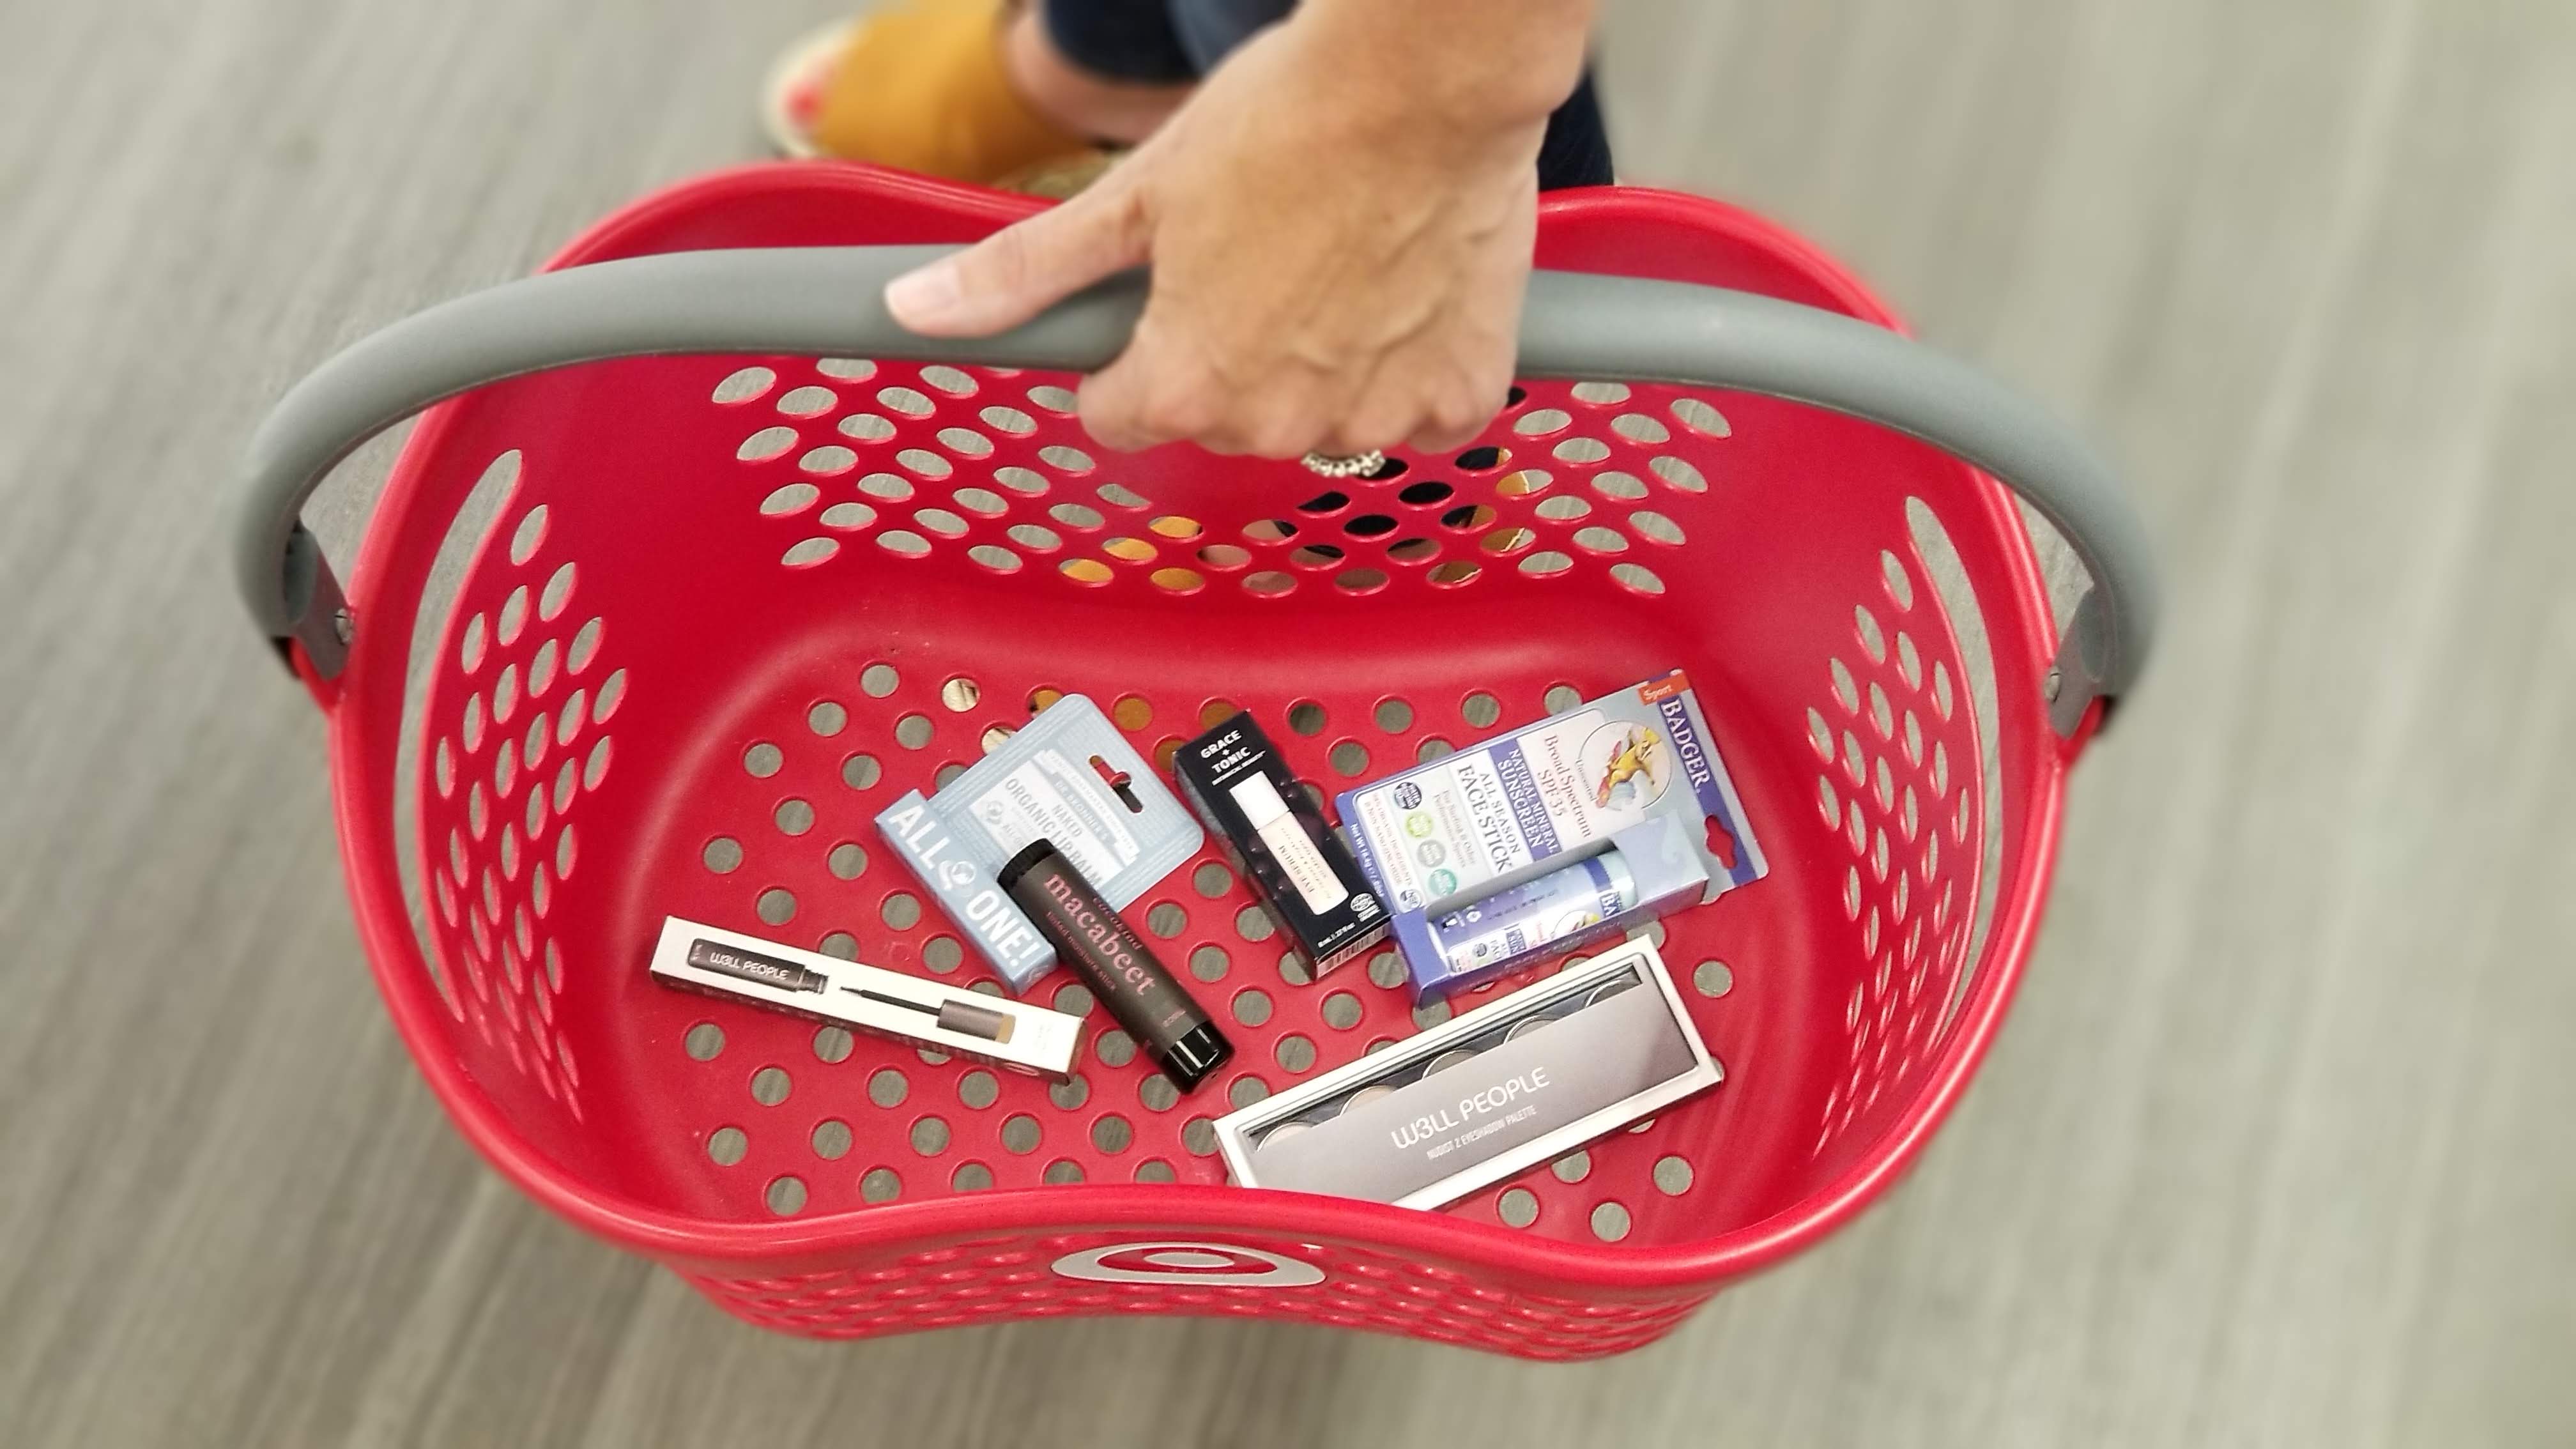 $100 To Spend On Clean Beauty At Target: Here’s What I’d Buy!